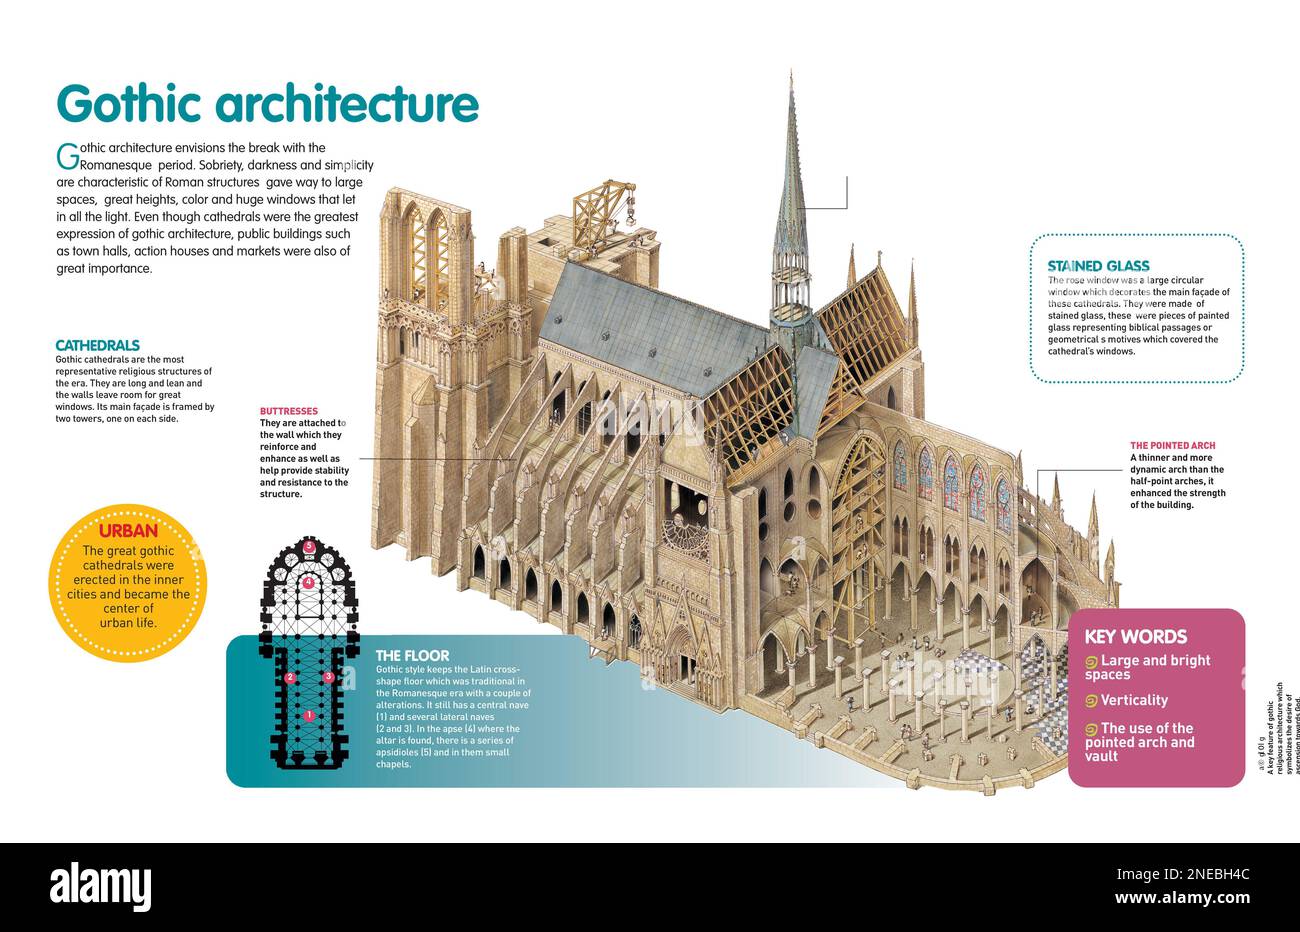 Infographic about Gothic art that developed starting on the 12th century in Western Europe, whose most important representation are the cathedrals. [QuarkXPress (.qxp); Adobe InDesign (.indd); 4960x3188]. Stock Photo